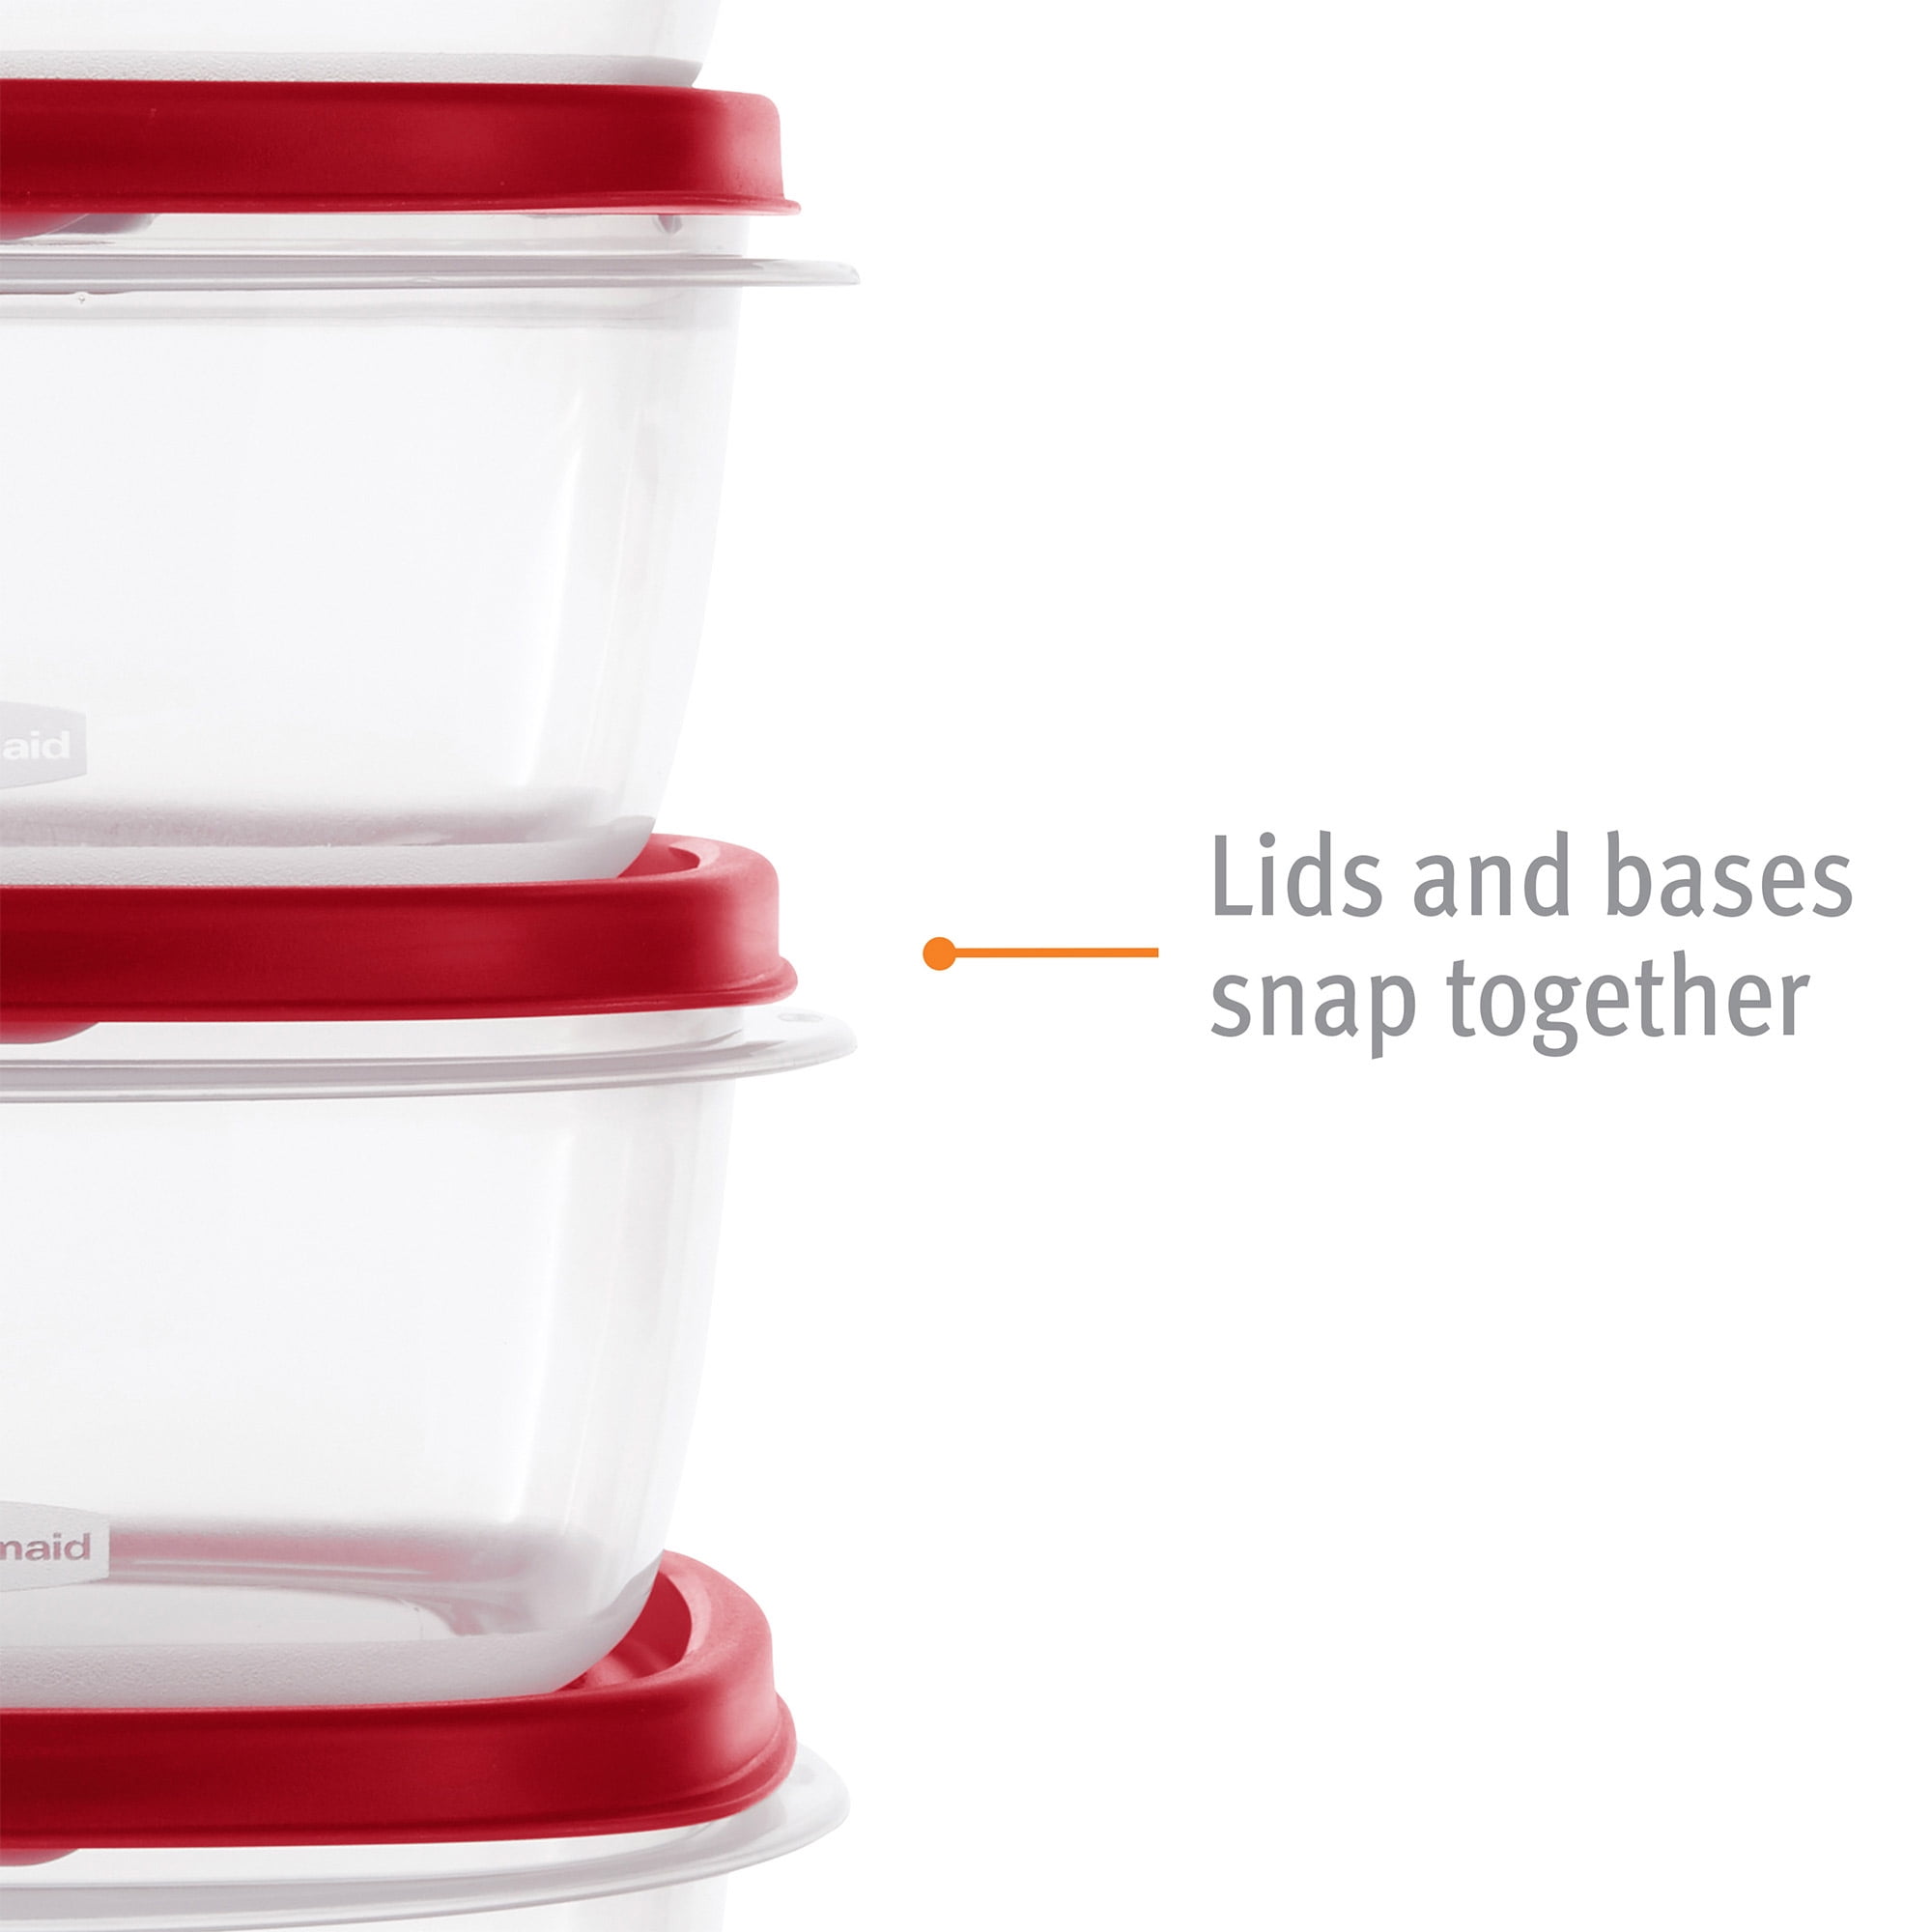 Rubbermaid® Easy-Find Lids Storage Containers 2 Pack - Red/Clear, 2 pk -  Fry's Food Stores